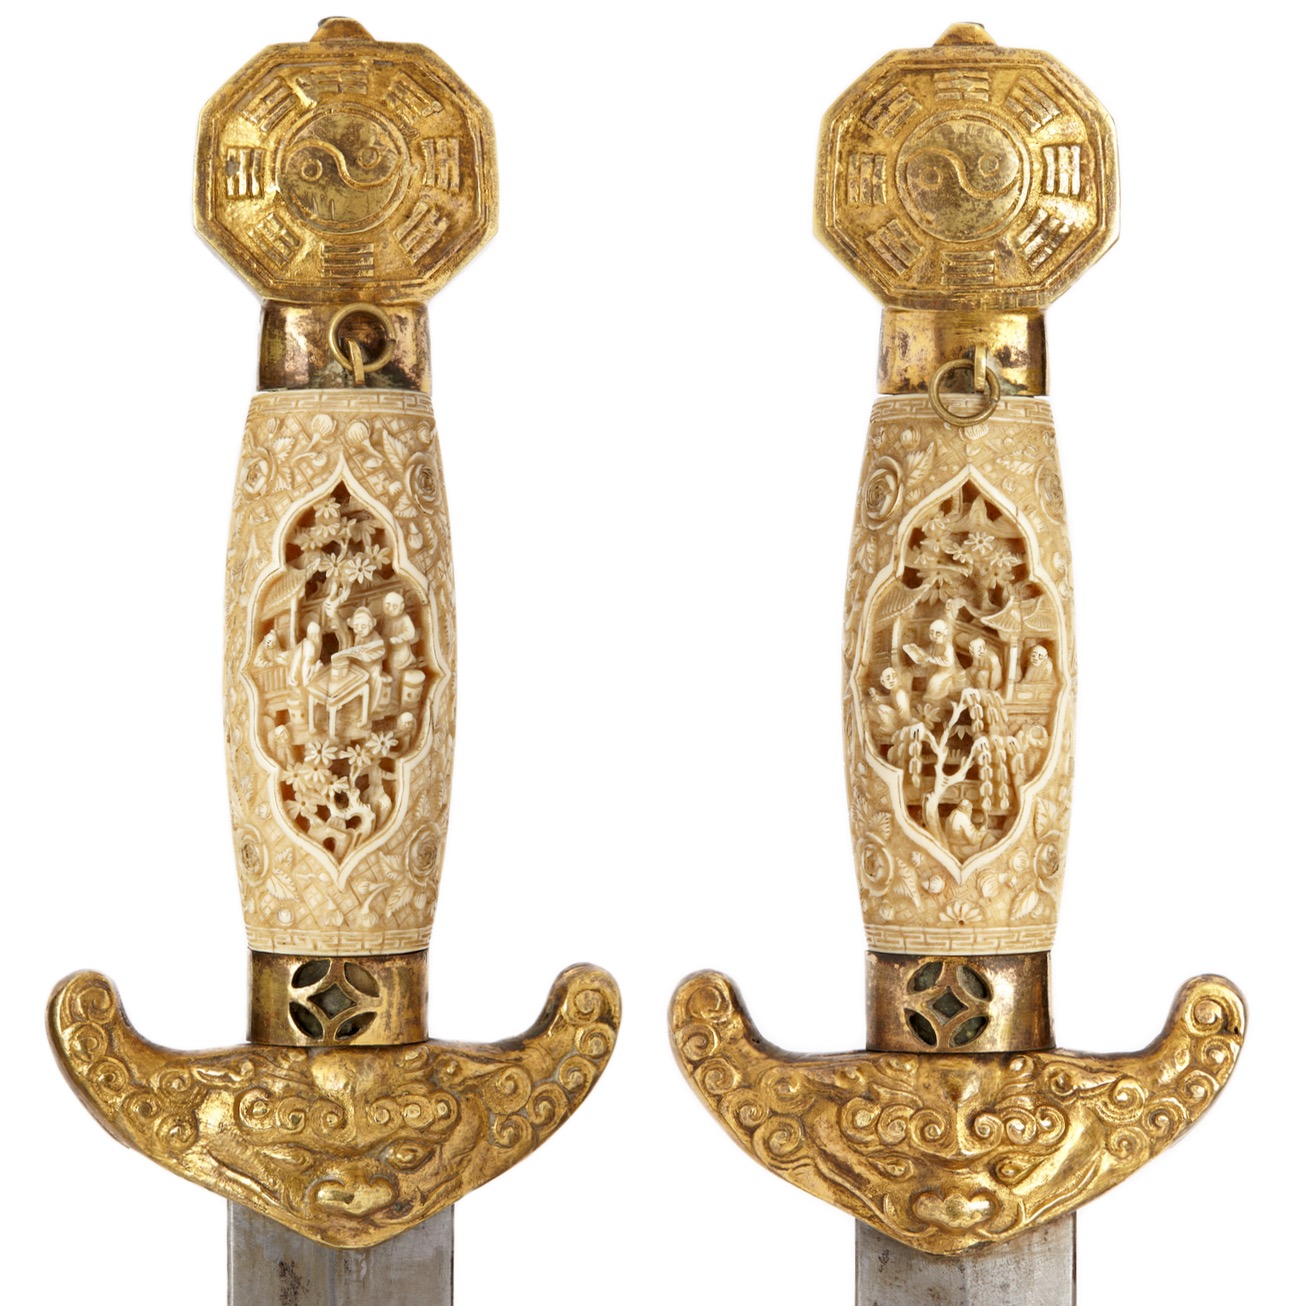 Antique Chinese double swords with carved ivory handles. Guangzhou, 1830's - 40's